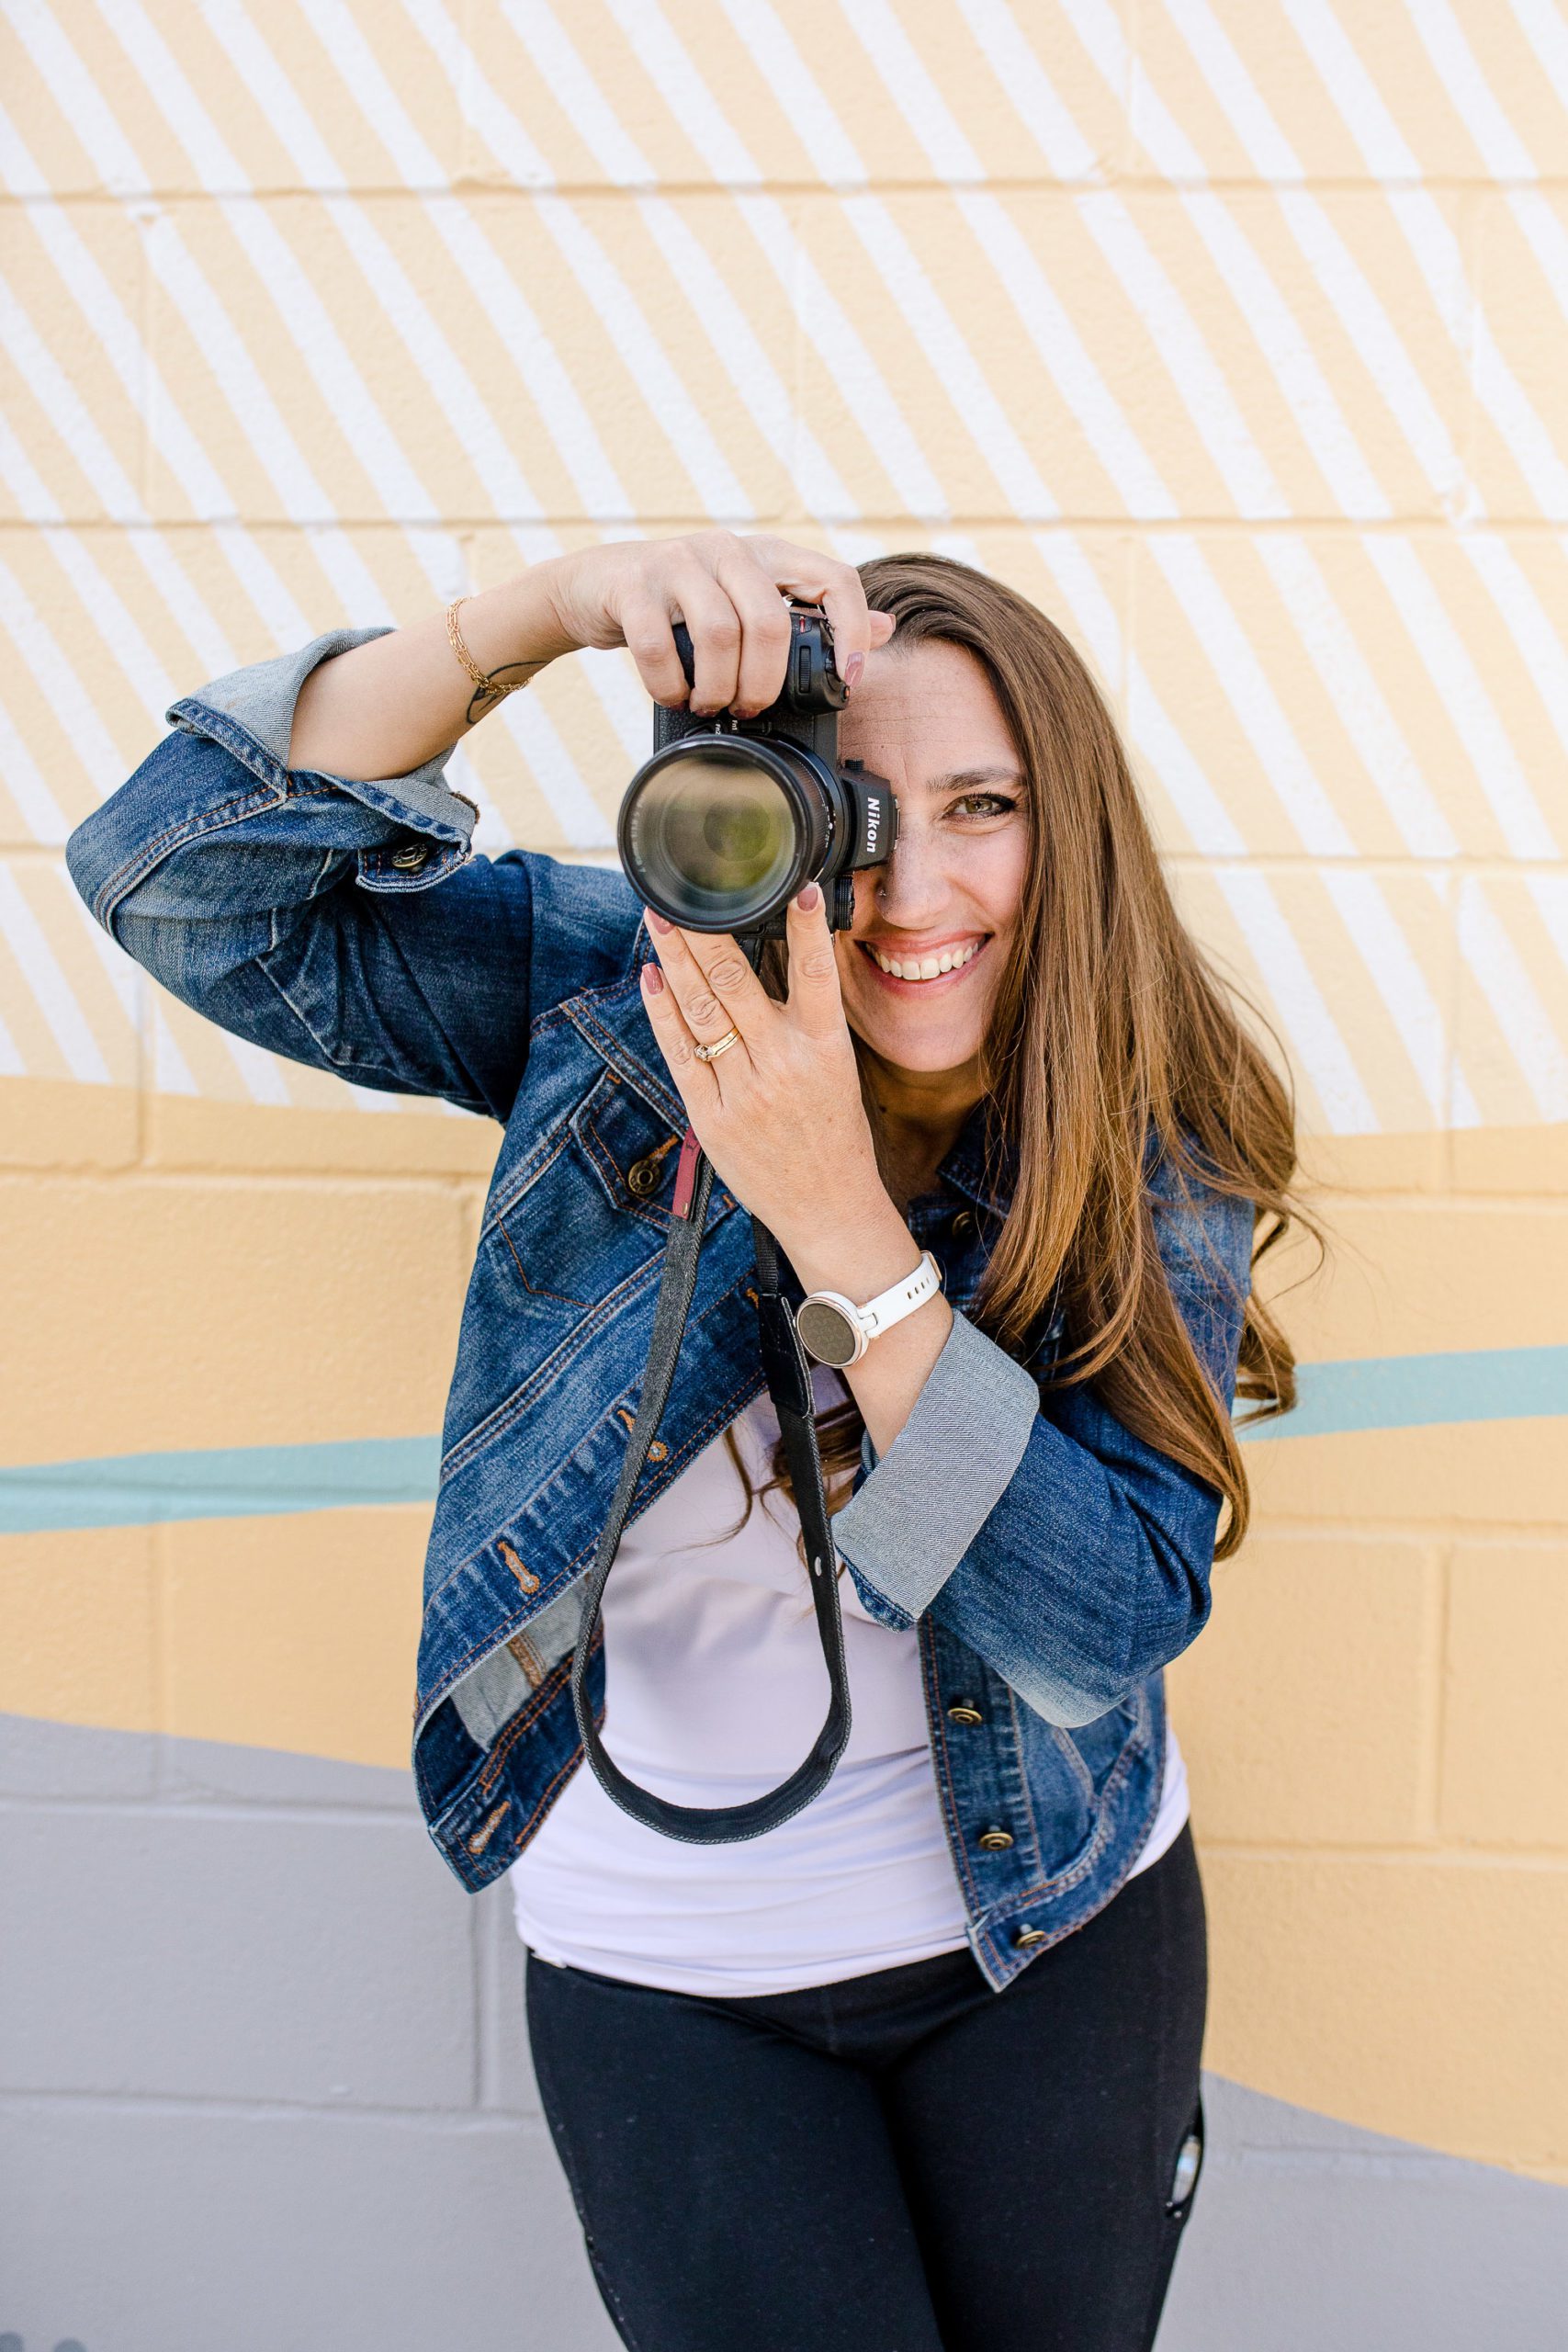 Woman standing in front of a yellow striped wall wearing a white shirt and jean jacket holds up a camera to her face and smiles at Denver commercial photographers.